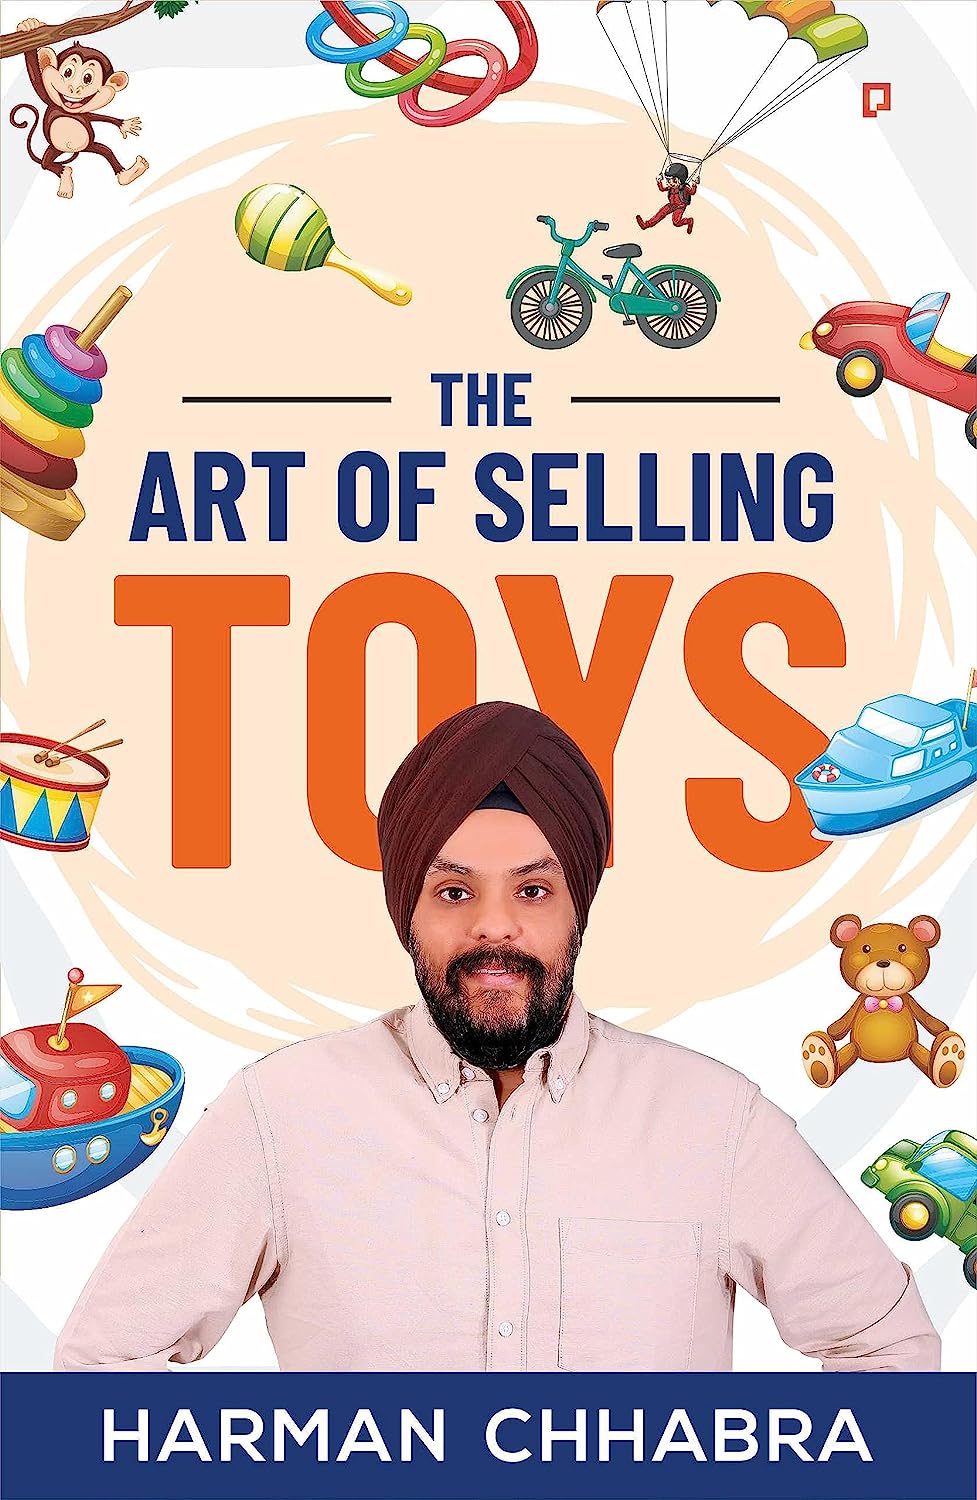 The Art of Selling Toys" – The Ultimate Guide for Toy Retailers By harman Chhabra